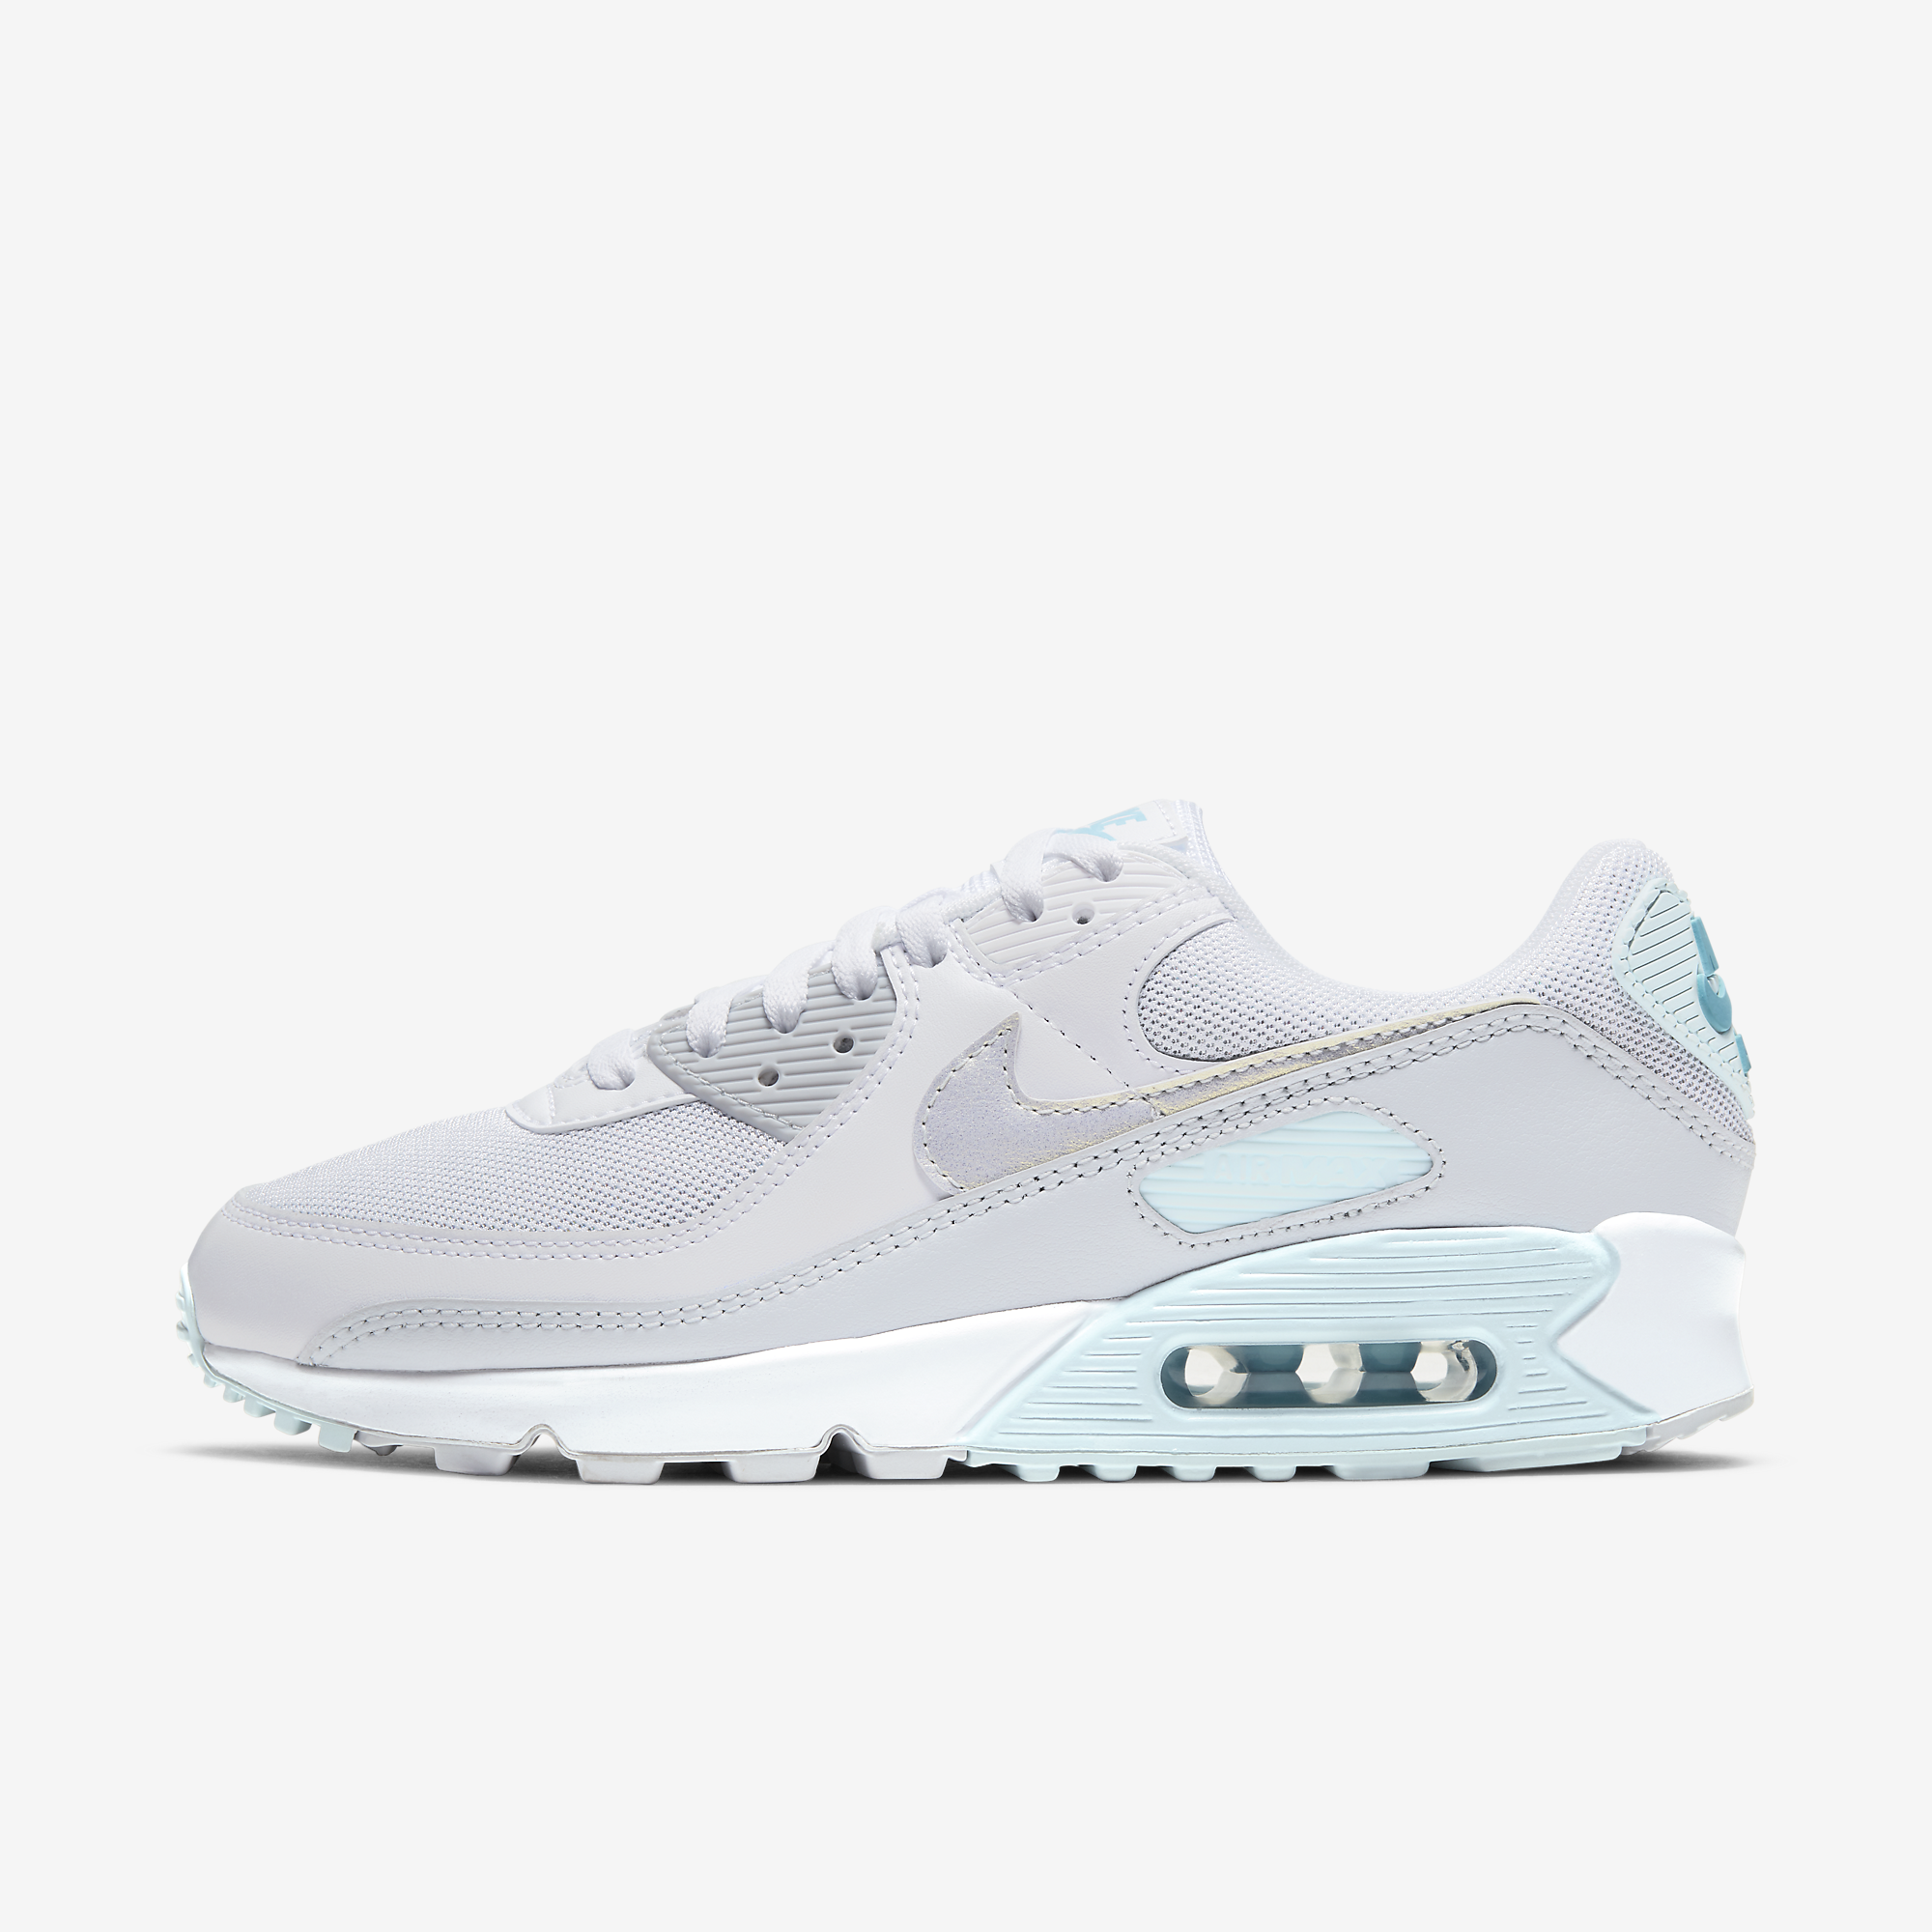 Nike Air Max 90 Frozen Blue DH4969-100 Release | SneakerNews.com